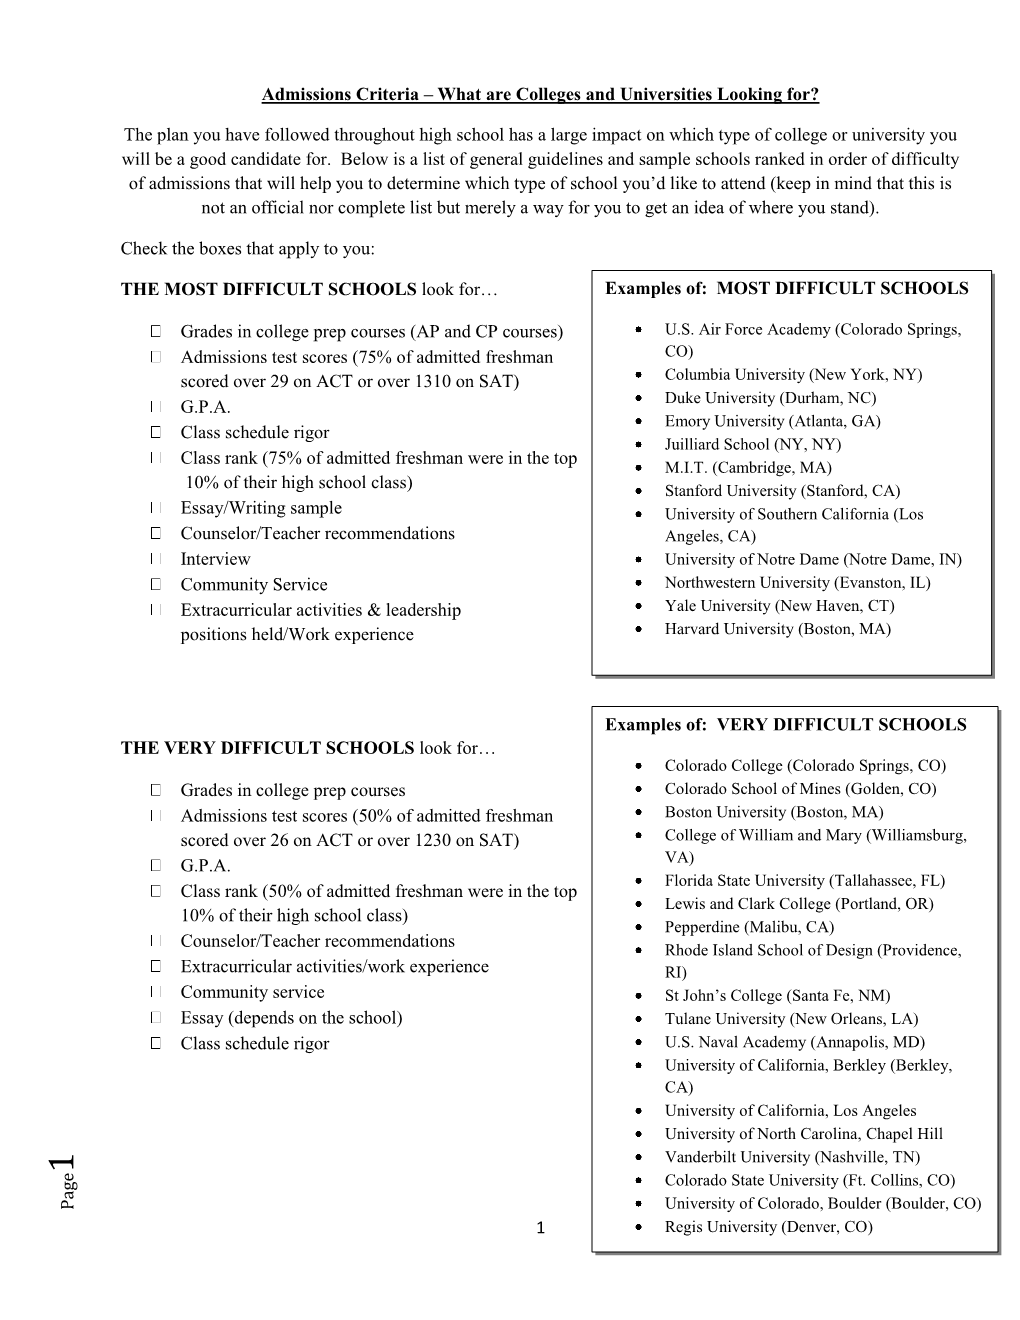 1 Page Admissions Criteria – What Are Colleges and Universities Looking For? the Plan You Have Followed Throughout High Scho